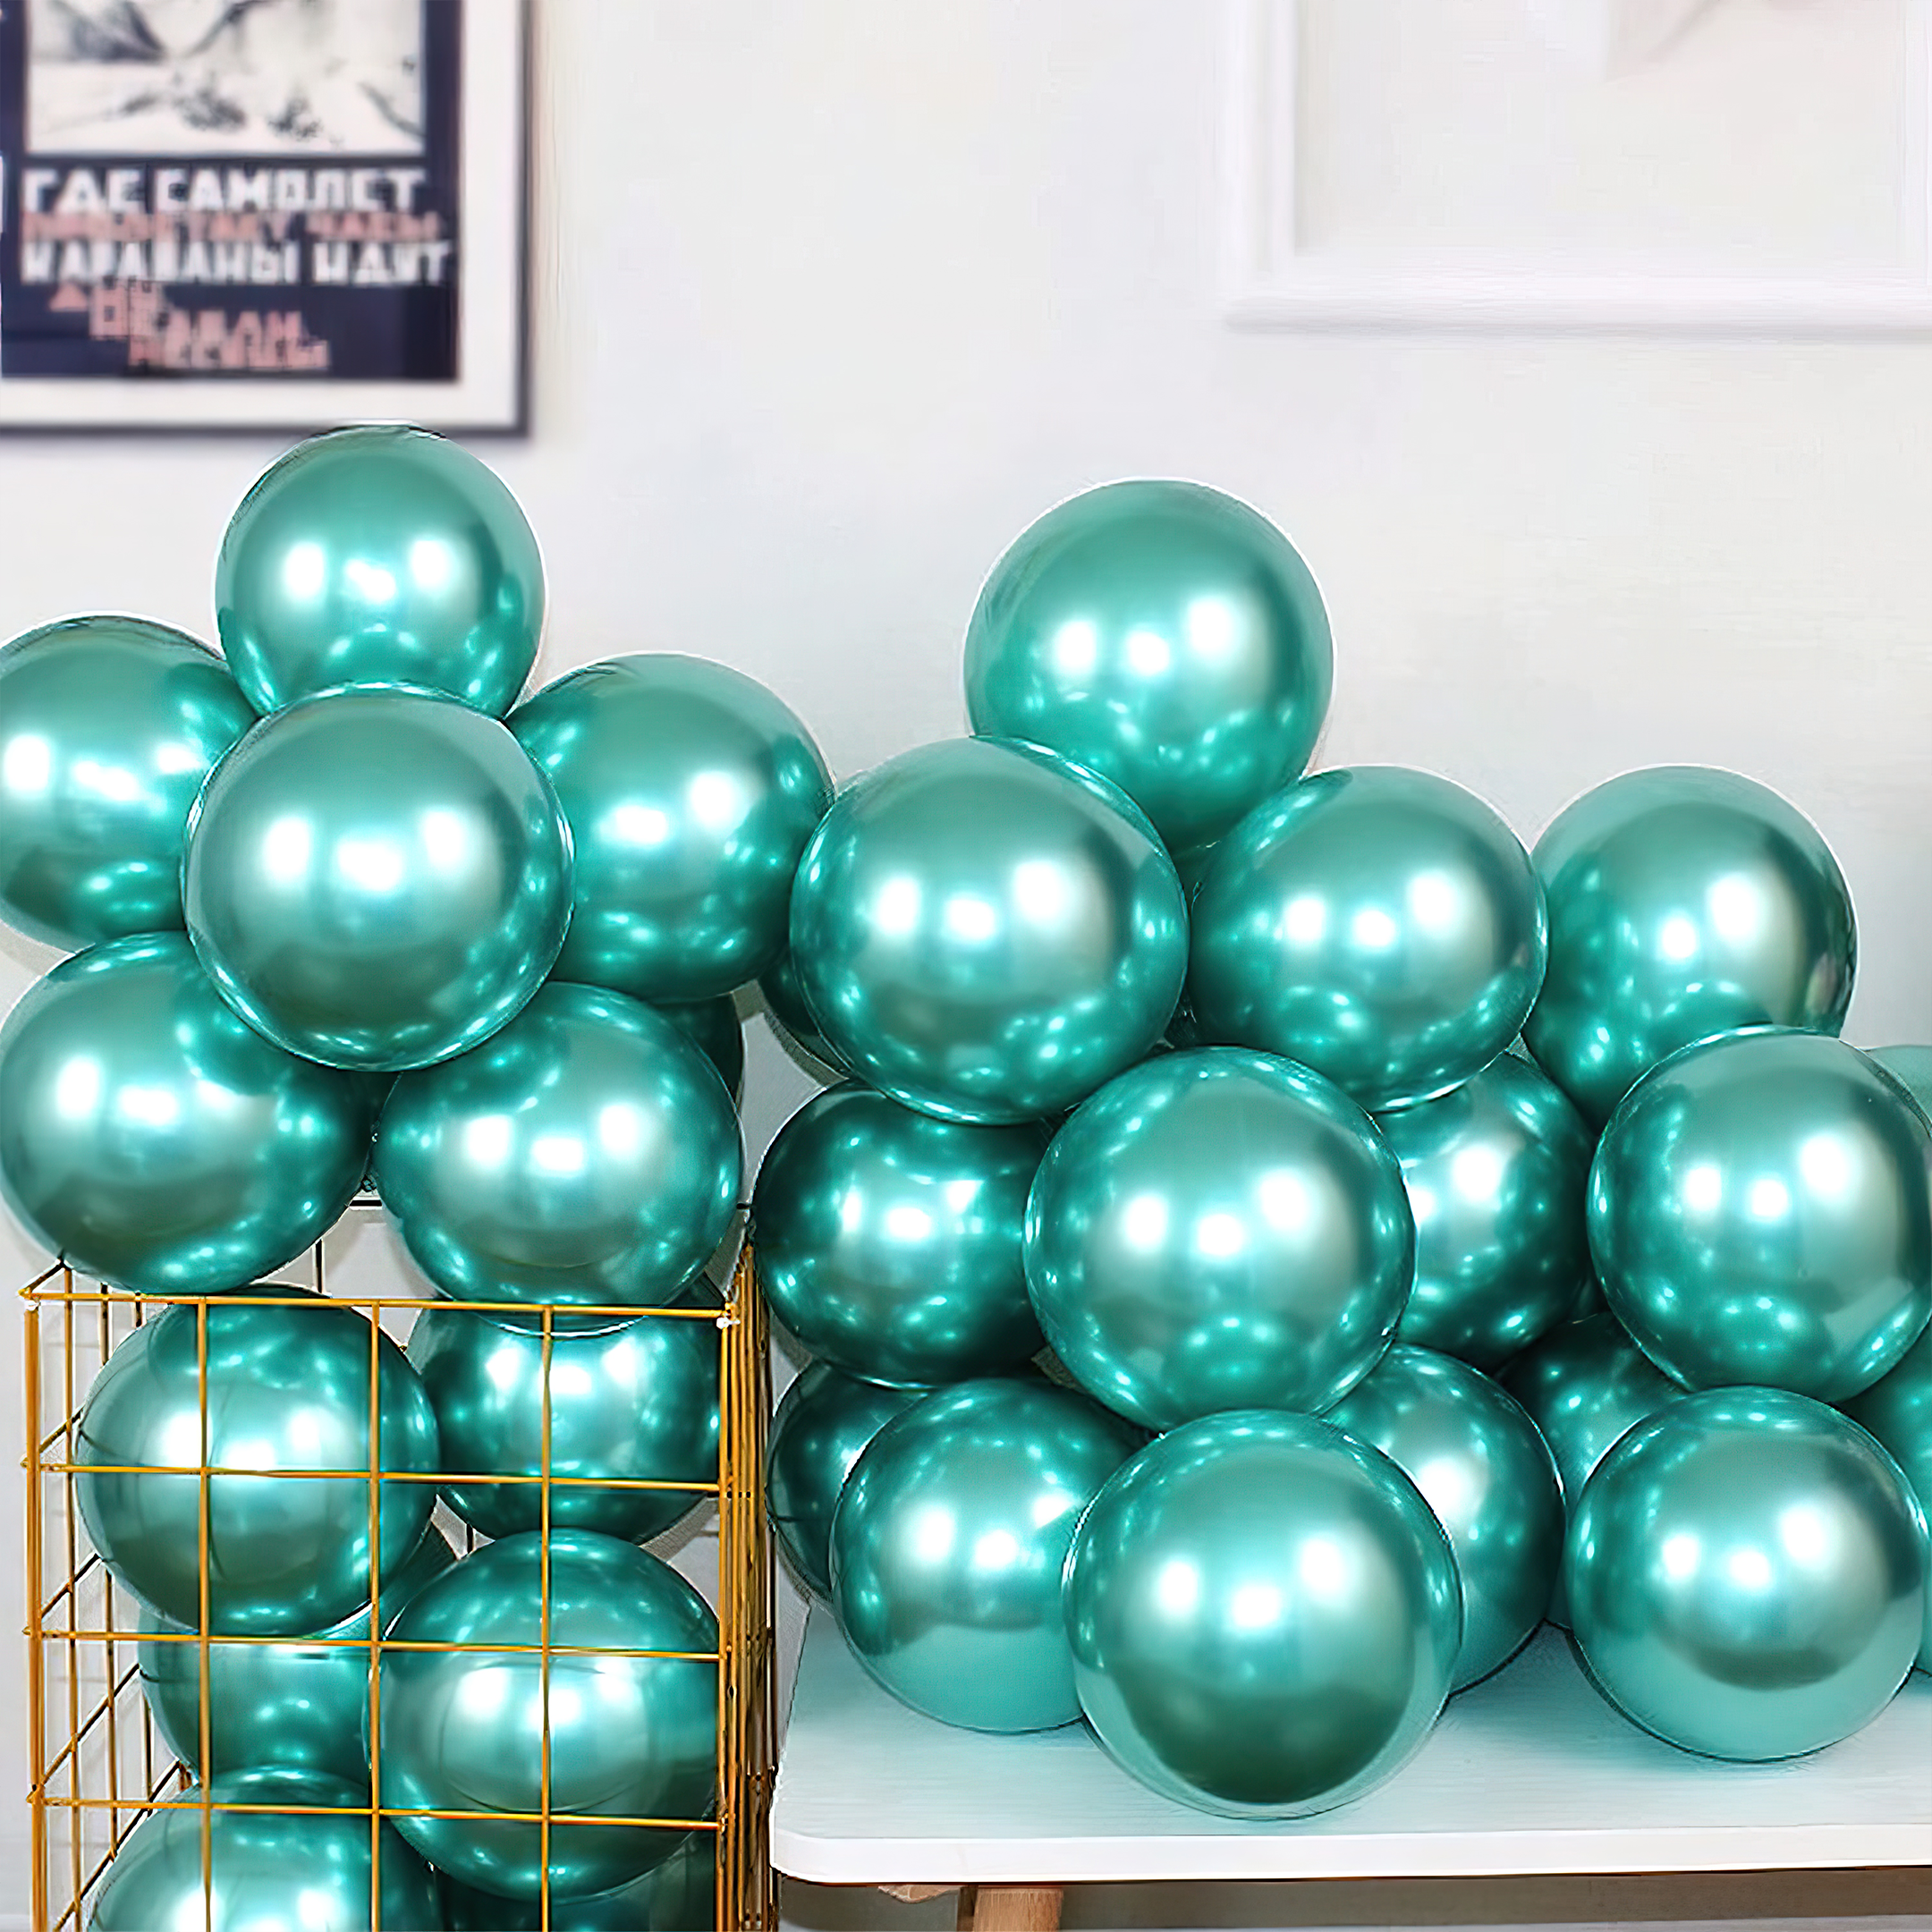 Green chrome party balloons for decoration